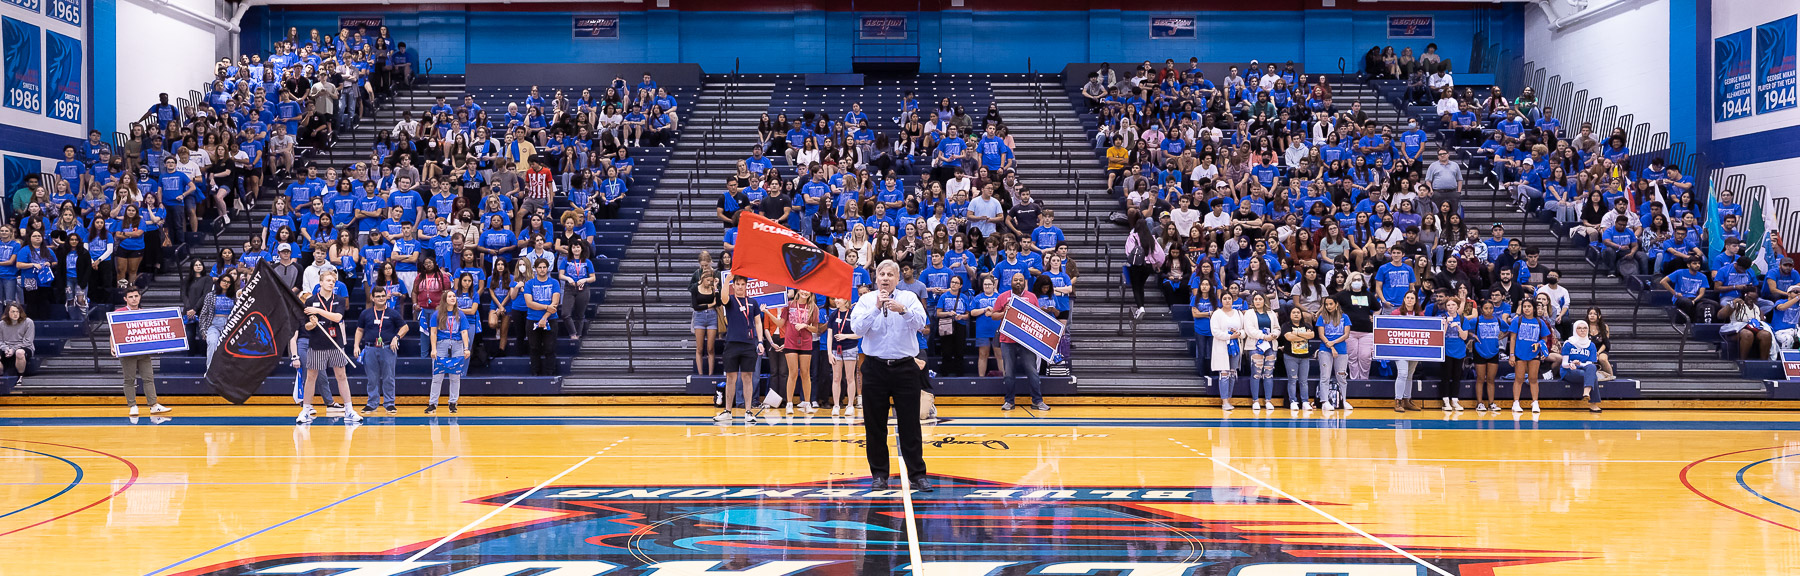 Doug Bruno, women’s basketball head coach, fired up the crowd of new students in McGrath-Phillips Arena. (DePaul University/Jeff Carrion)